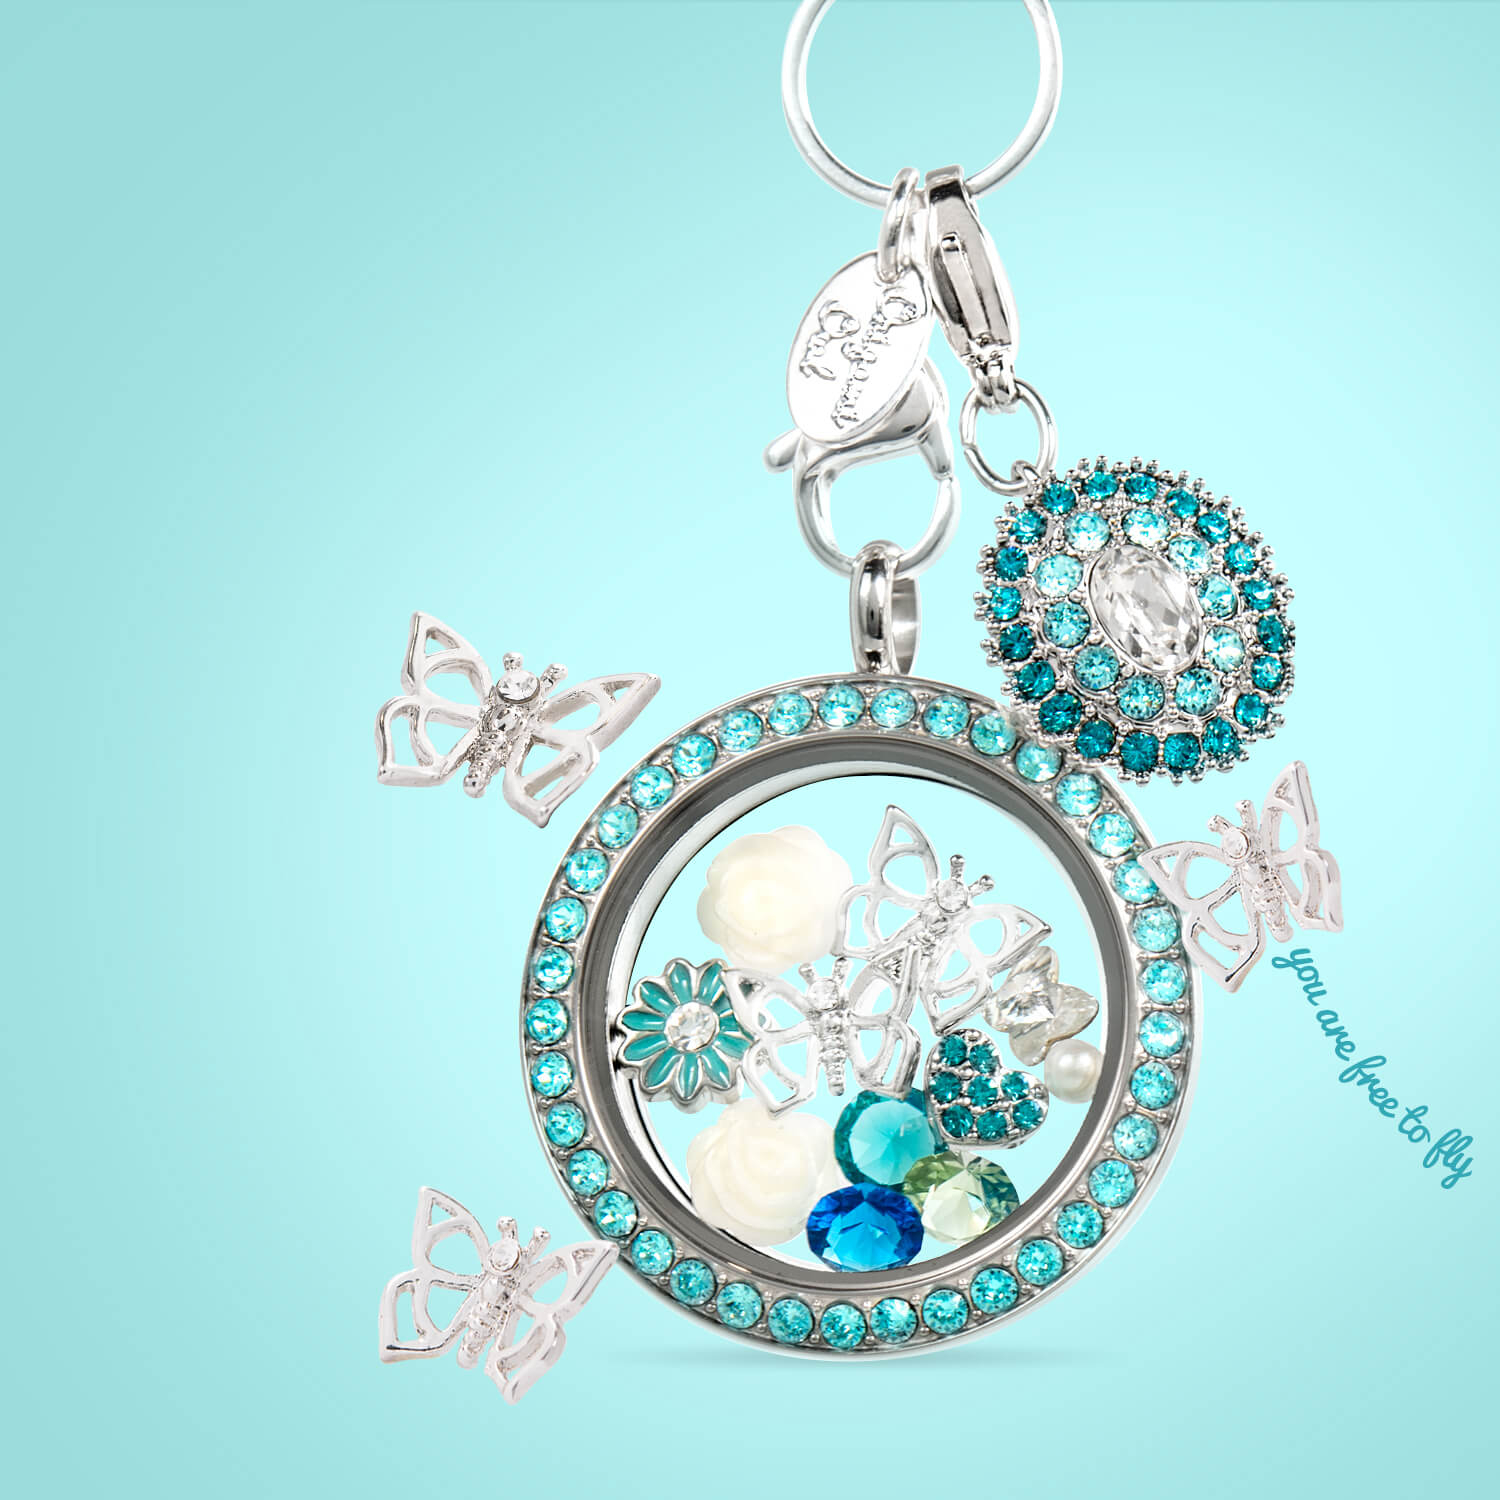 Origami Owl Family Origami Owl Jewelry Videos Join My Join My Team Be A Part Of An